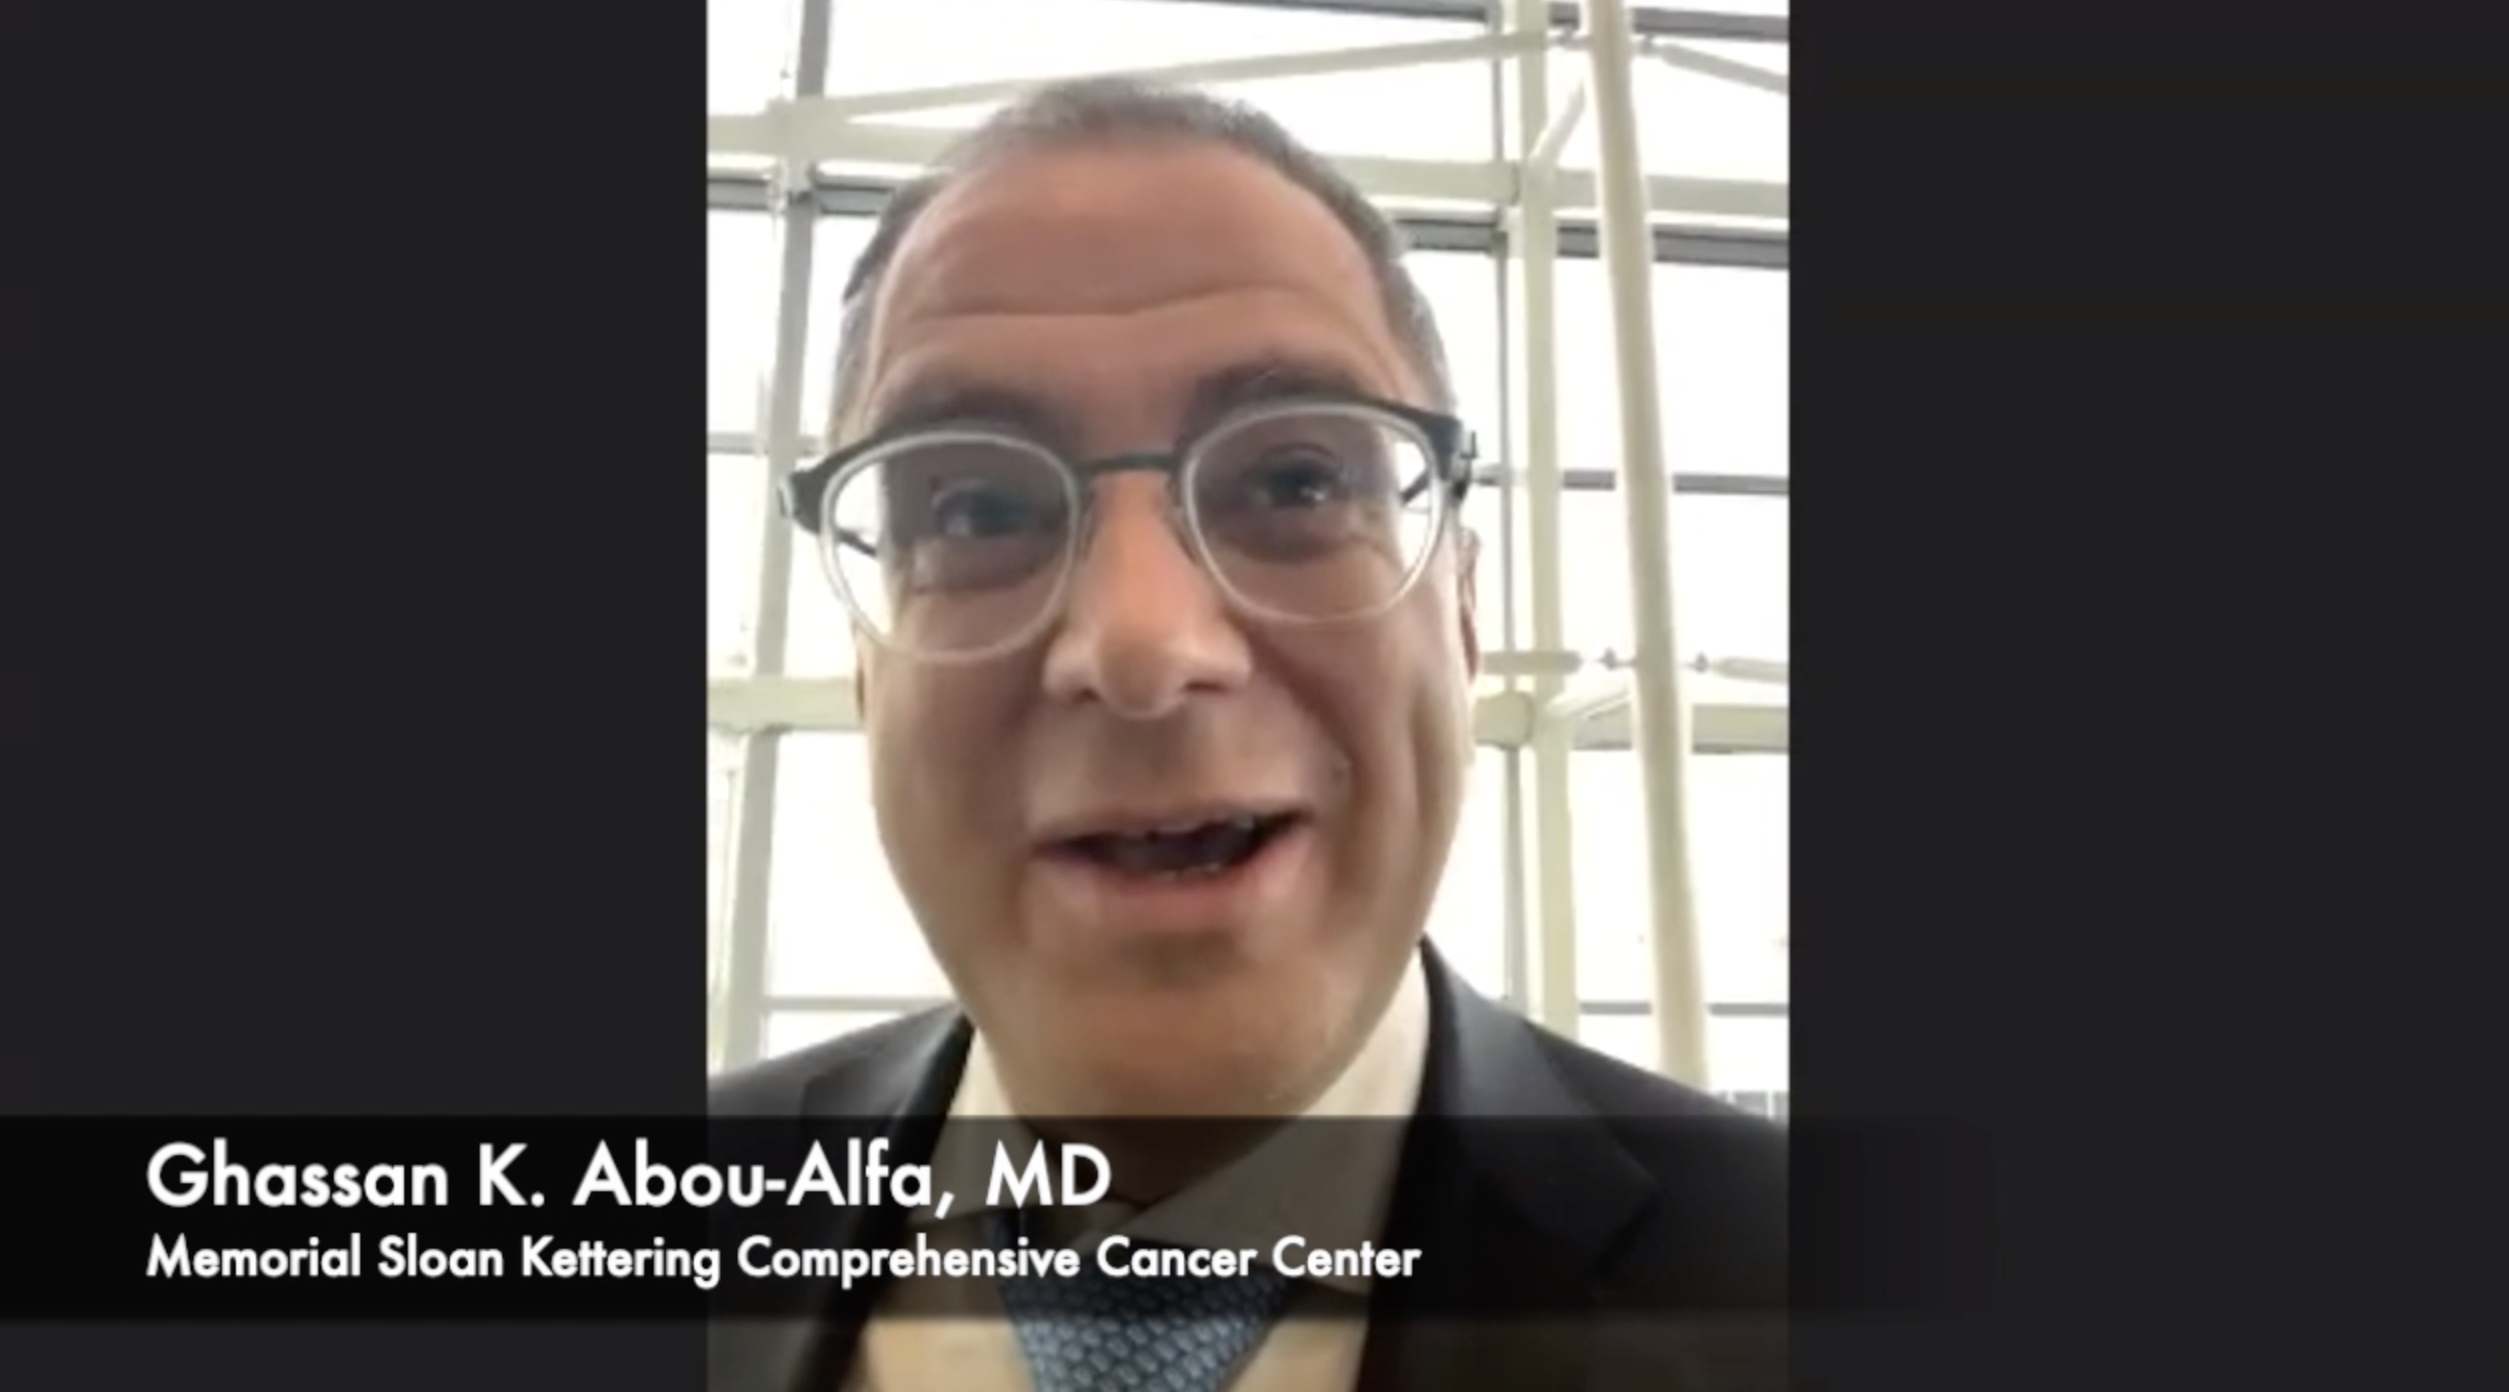 Ghassan K. Abou-Alfa, MD, detailed the evolution of treatment options for unresectable hepatocellular carcinoma prior to the phase 3 HIMALAYA study and the reasons for launching the trial.